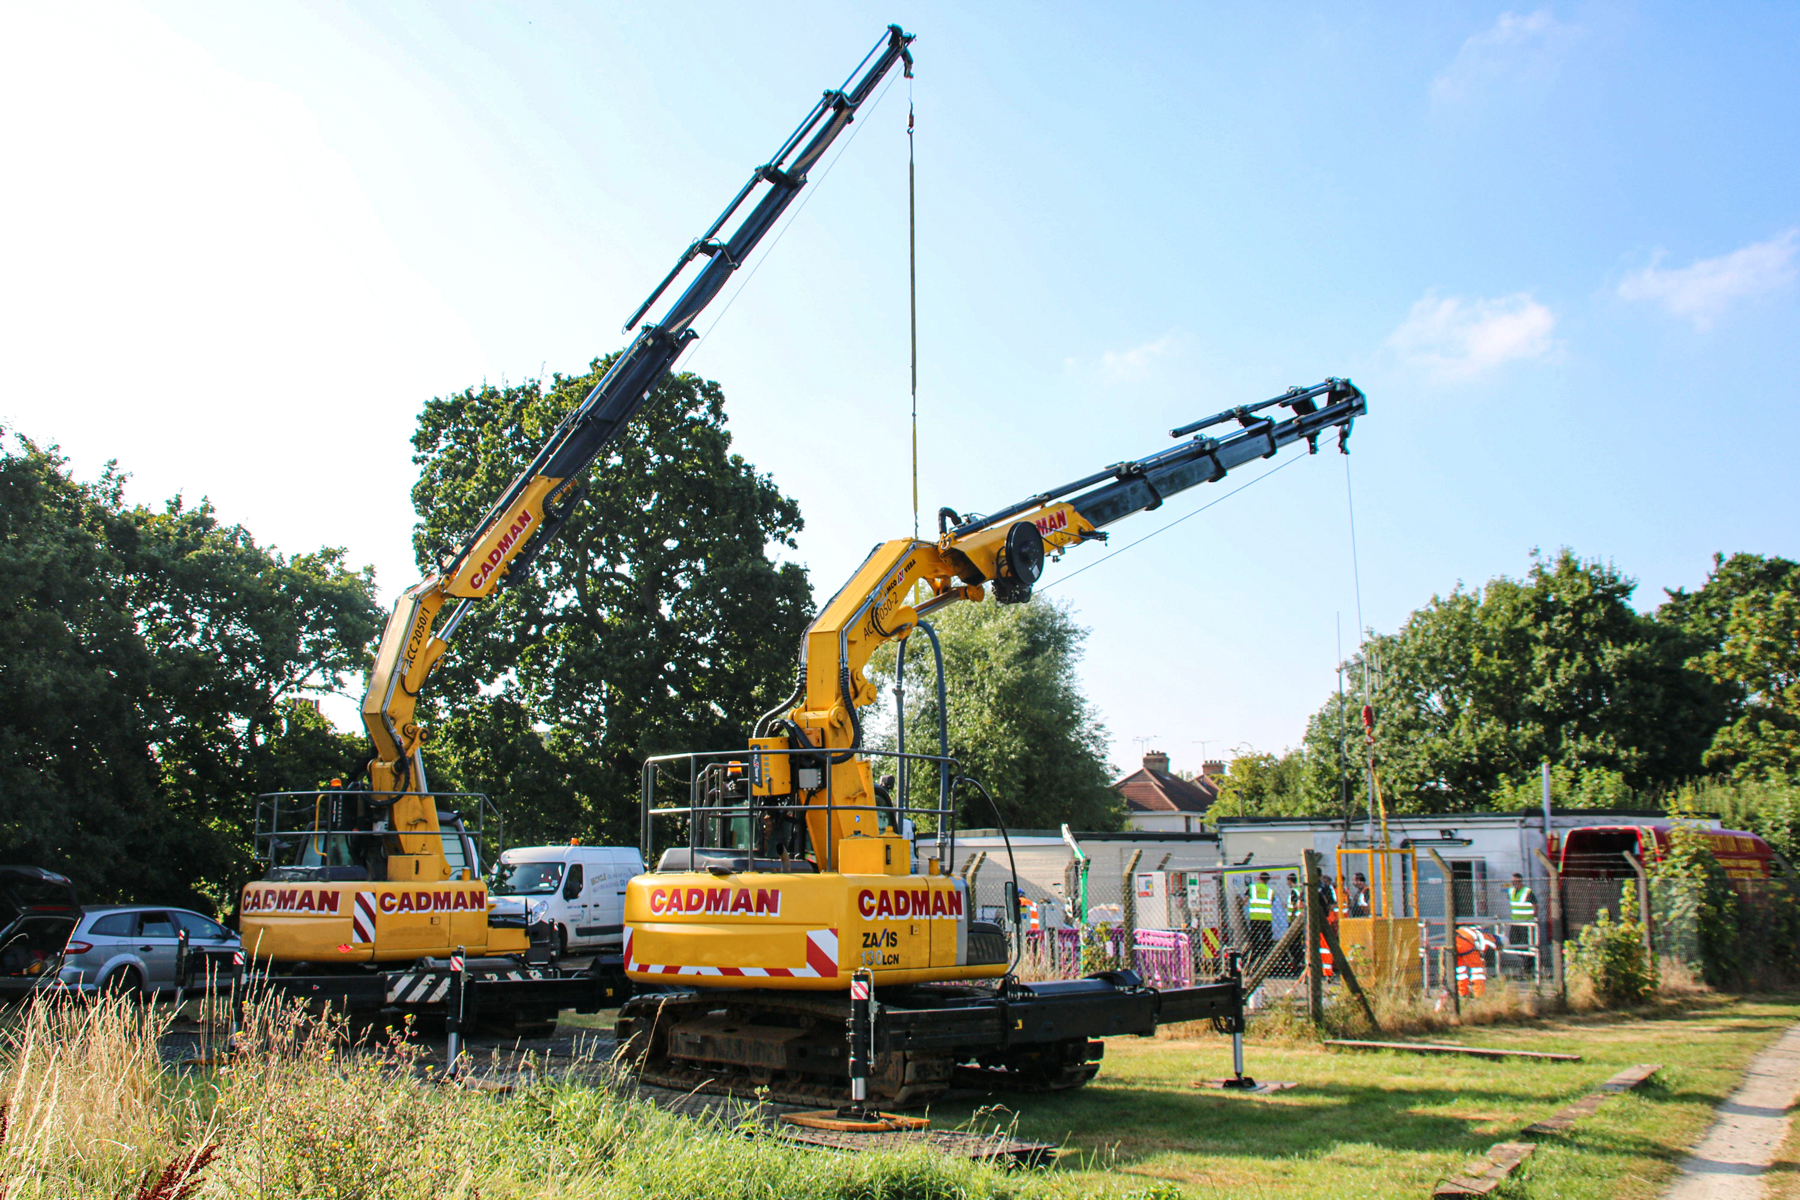 Two yellow compact crawler cranes sit next to each other working remotely in a field